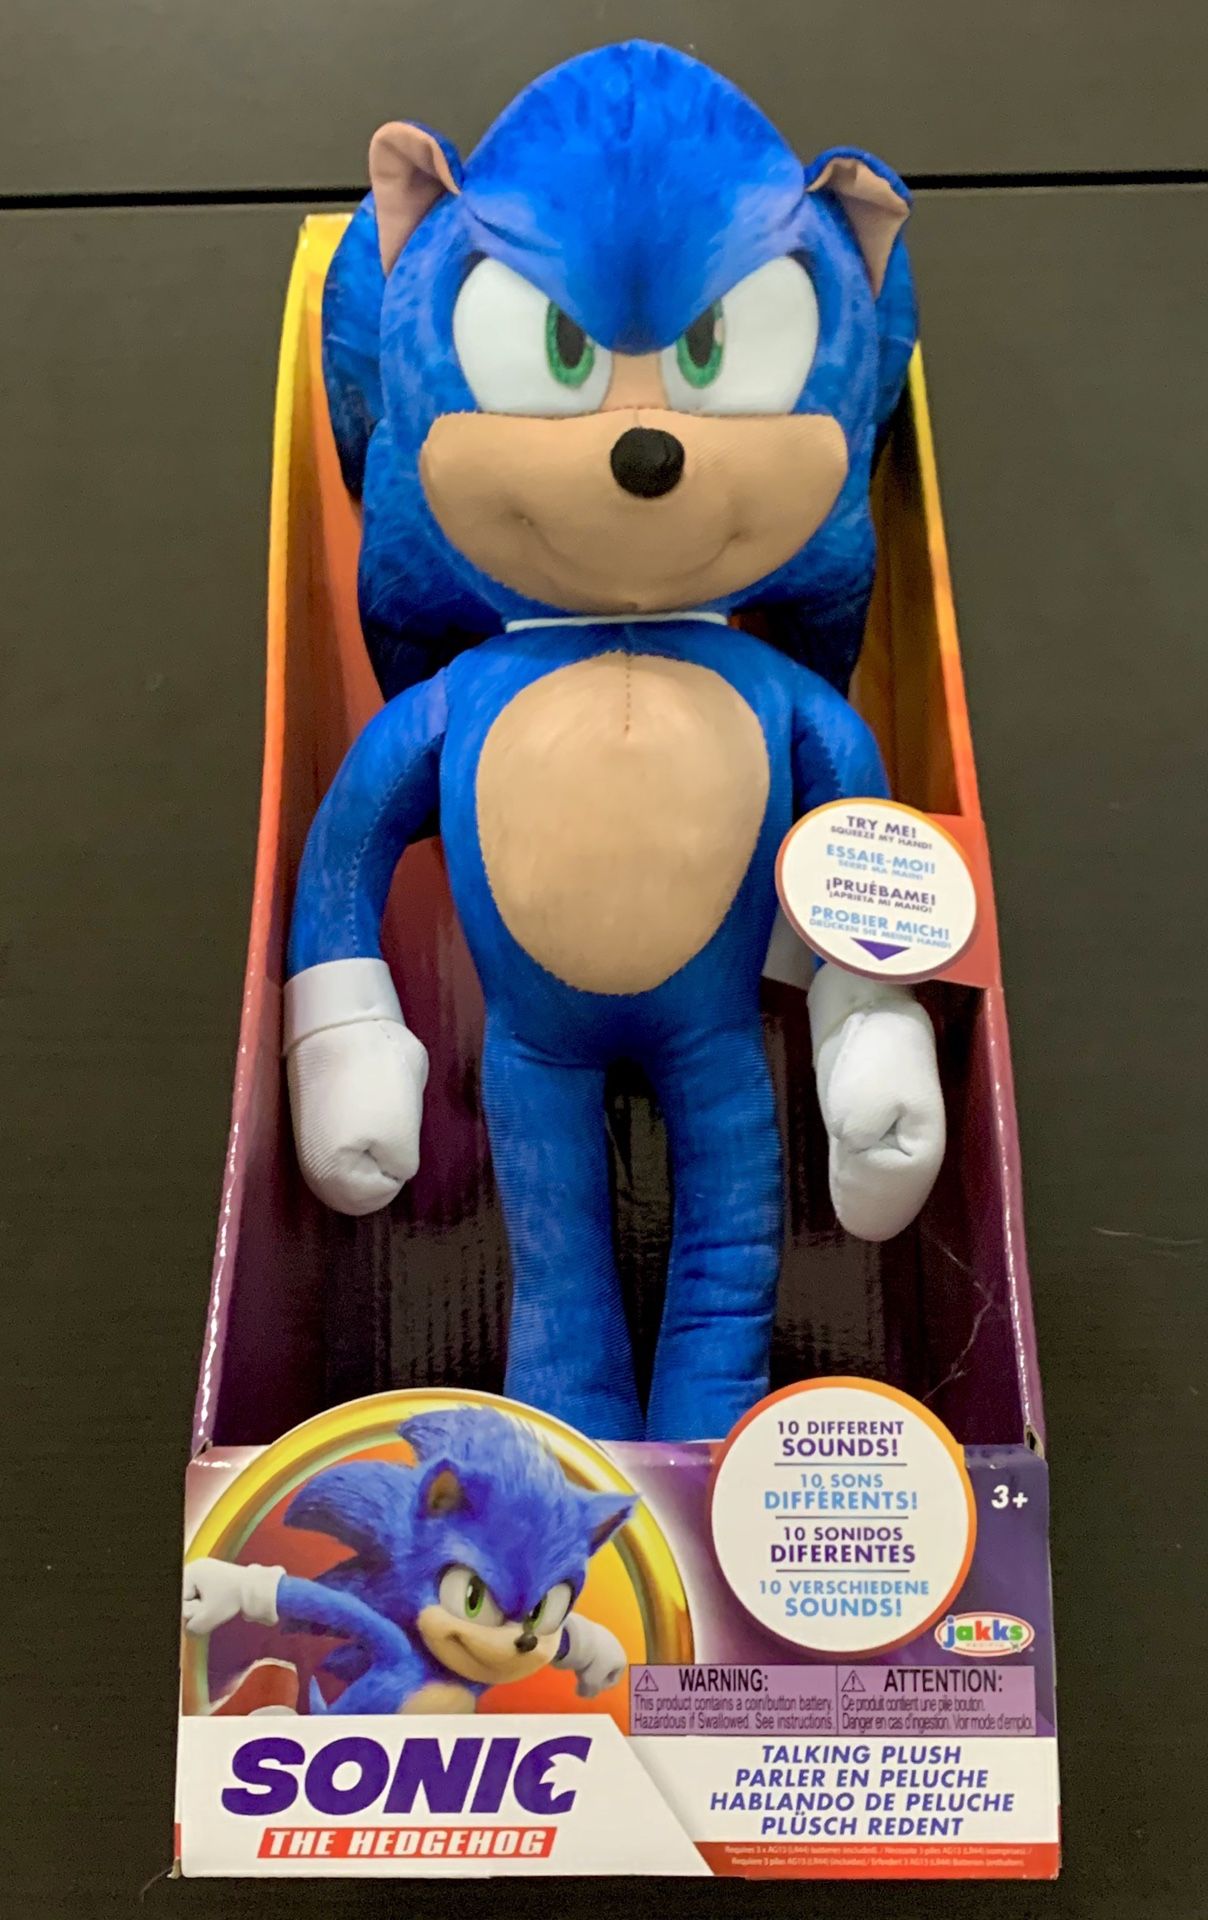 Sonic the Hedgehog 13" Talking Plush Toy from Sonic Movie